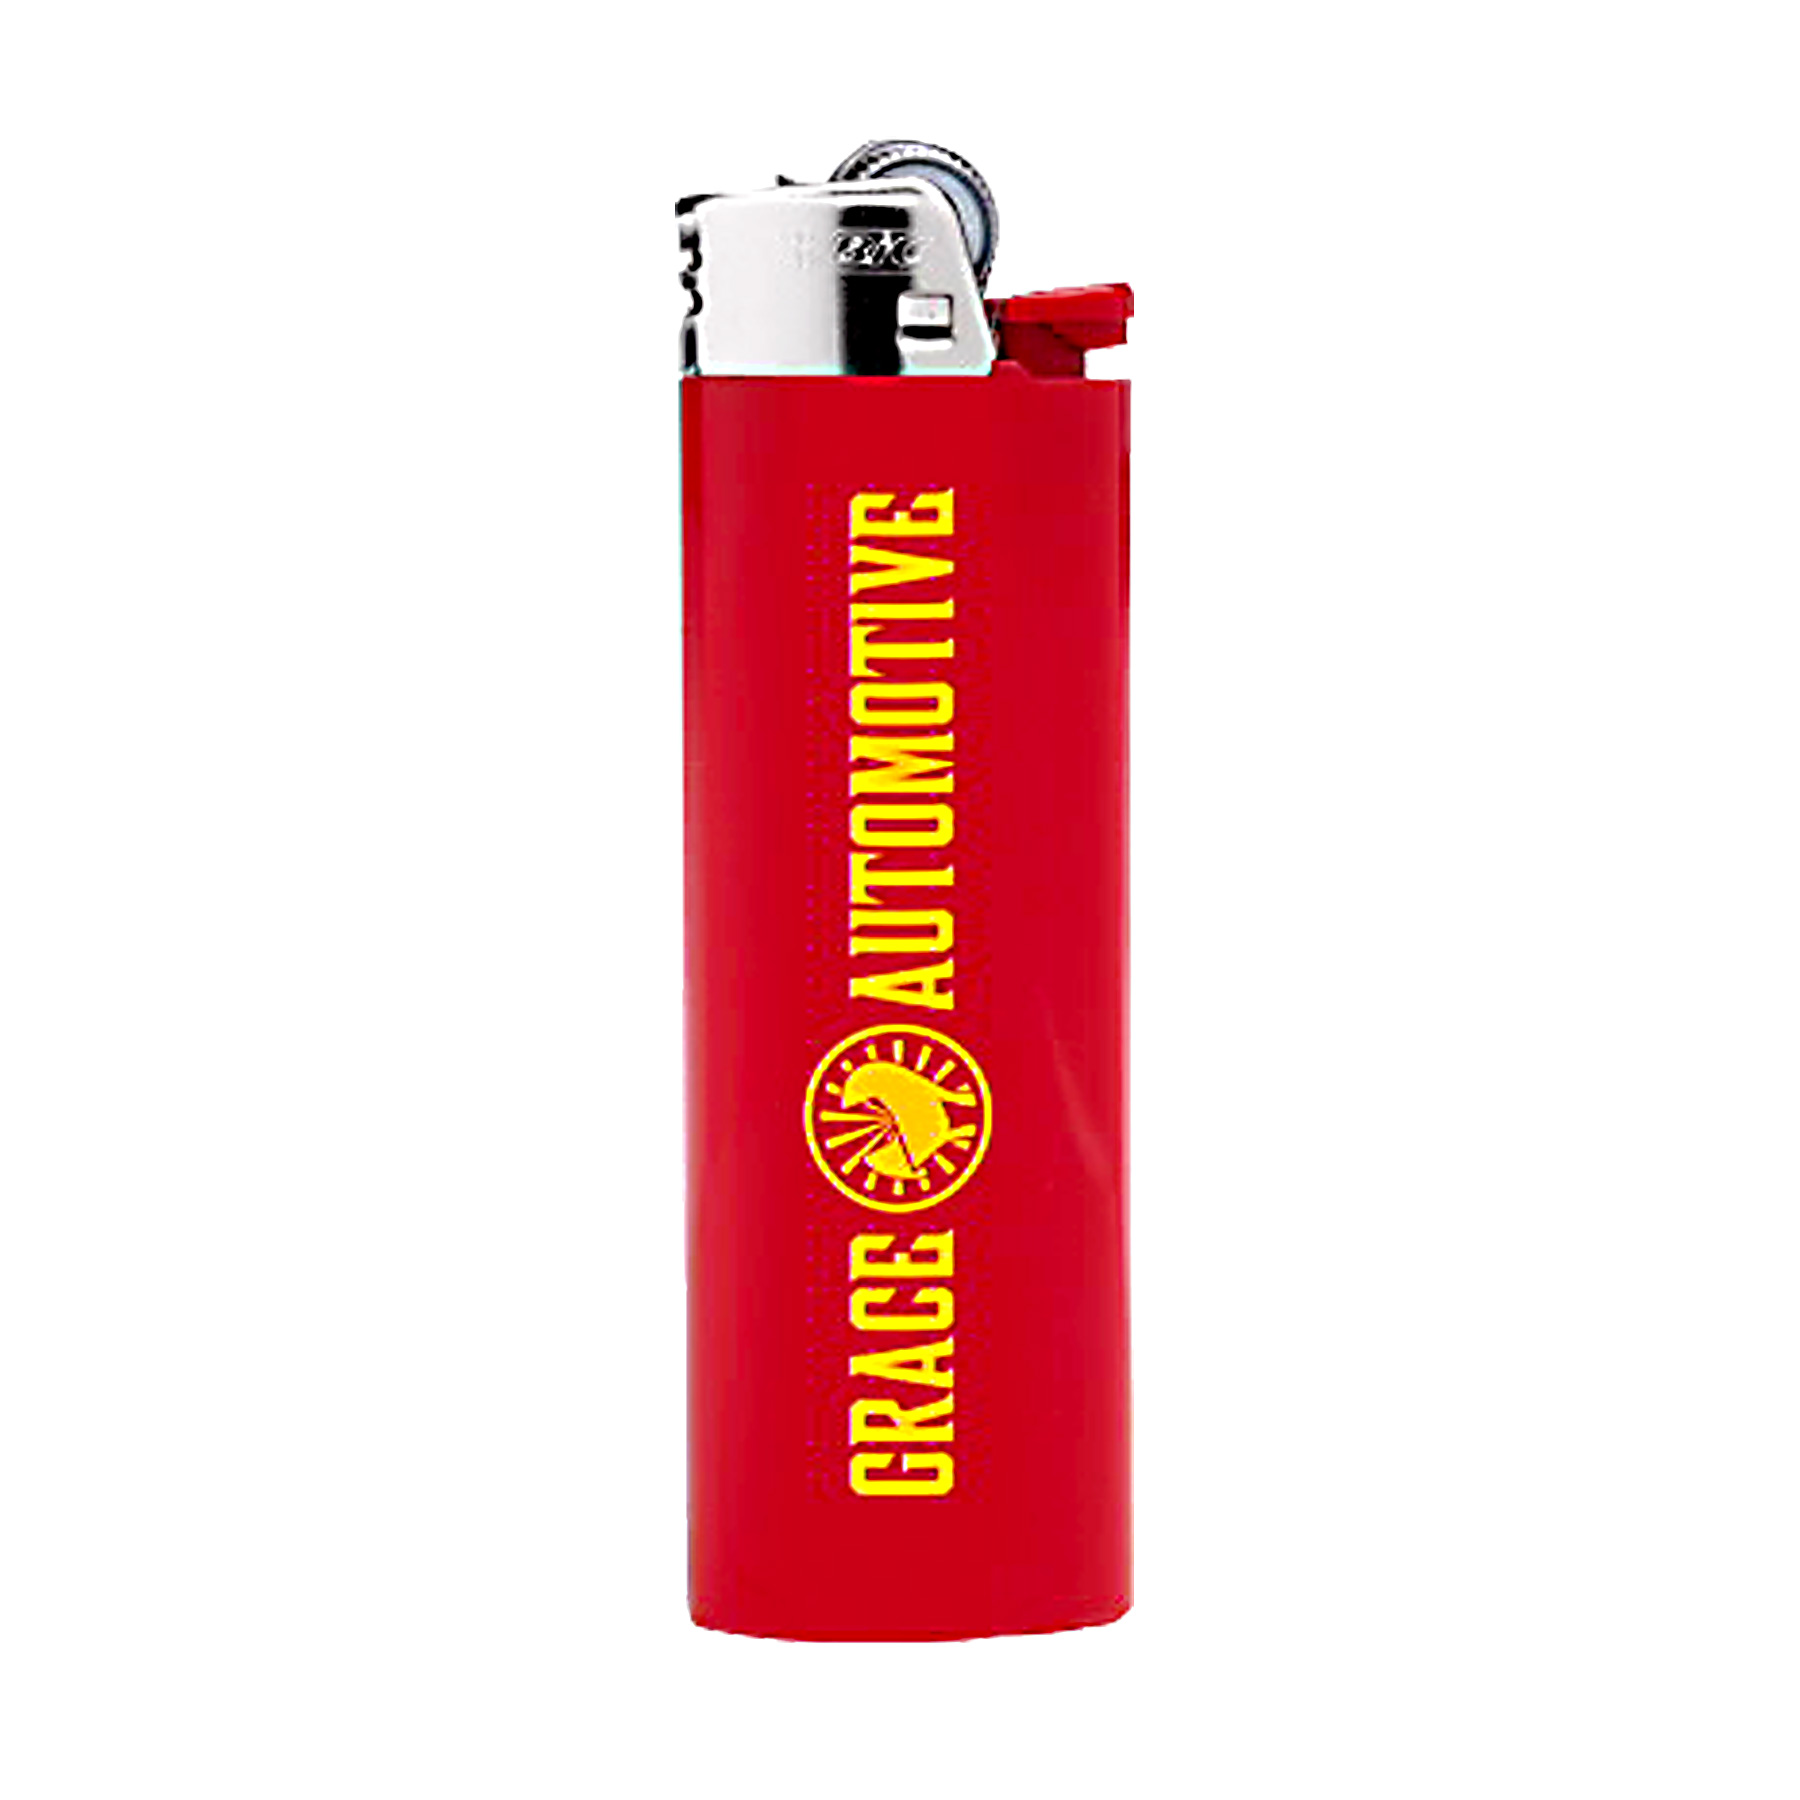 Promo BIC Lighters with Child Guard, Outdoors